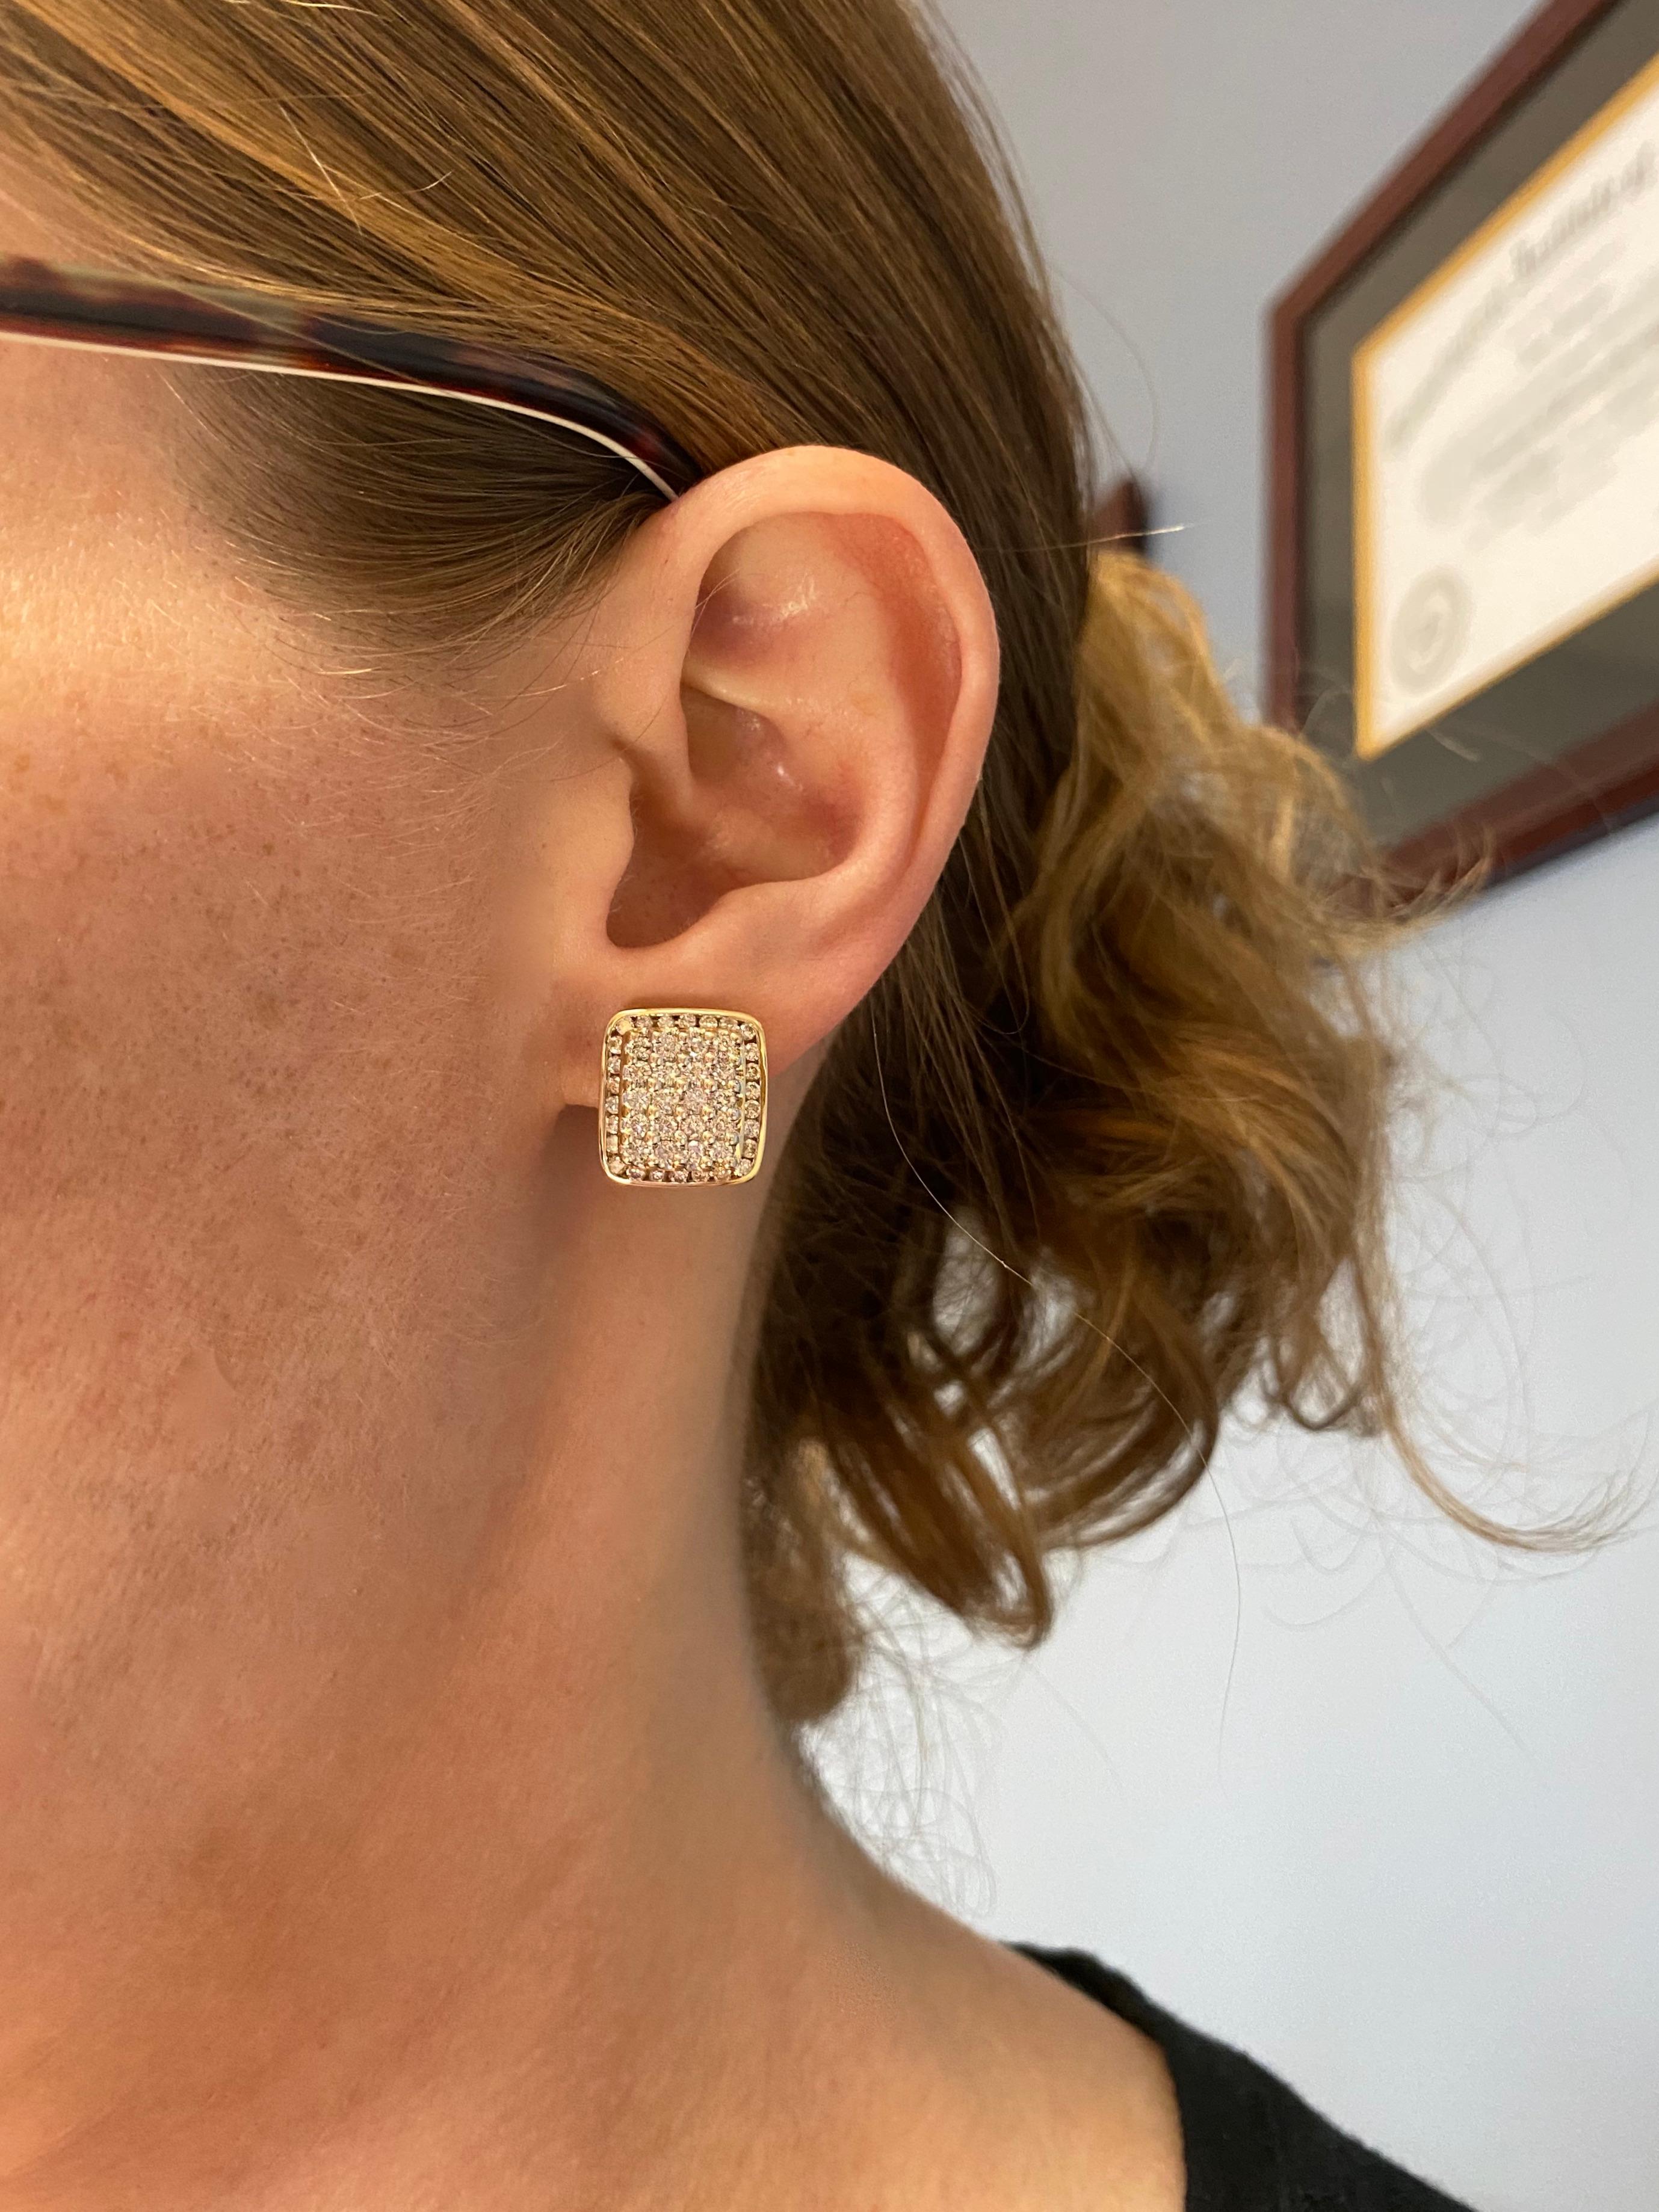 Omega-back diamond cluster block-style earrings in 14k yellow gold. 

Diamond Carat Weight: 2.25CTW
Diamond Cut: Round Brilliant Cut Diamonds
Color: Average F-I
Clarity: Average VS
Metal: 14K Yellow Gold
Marked/Tested: Stamped “14k